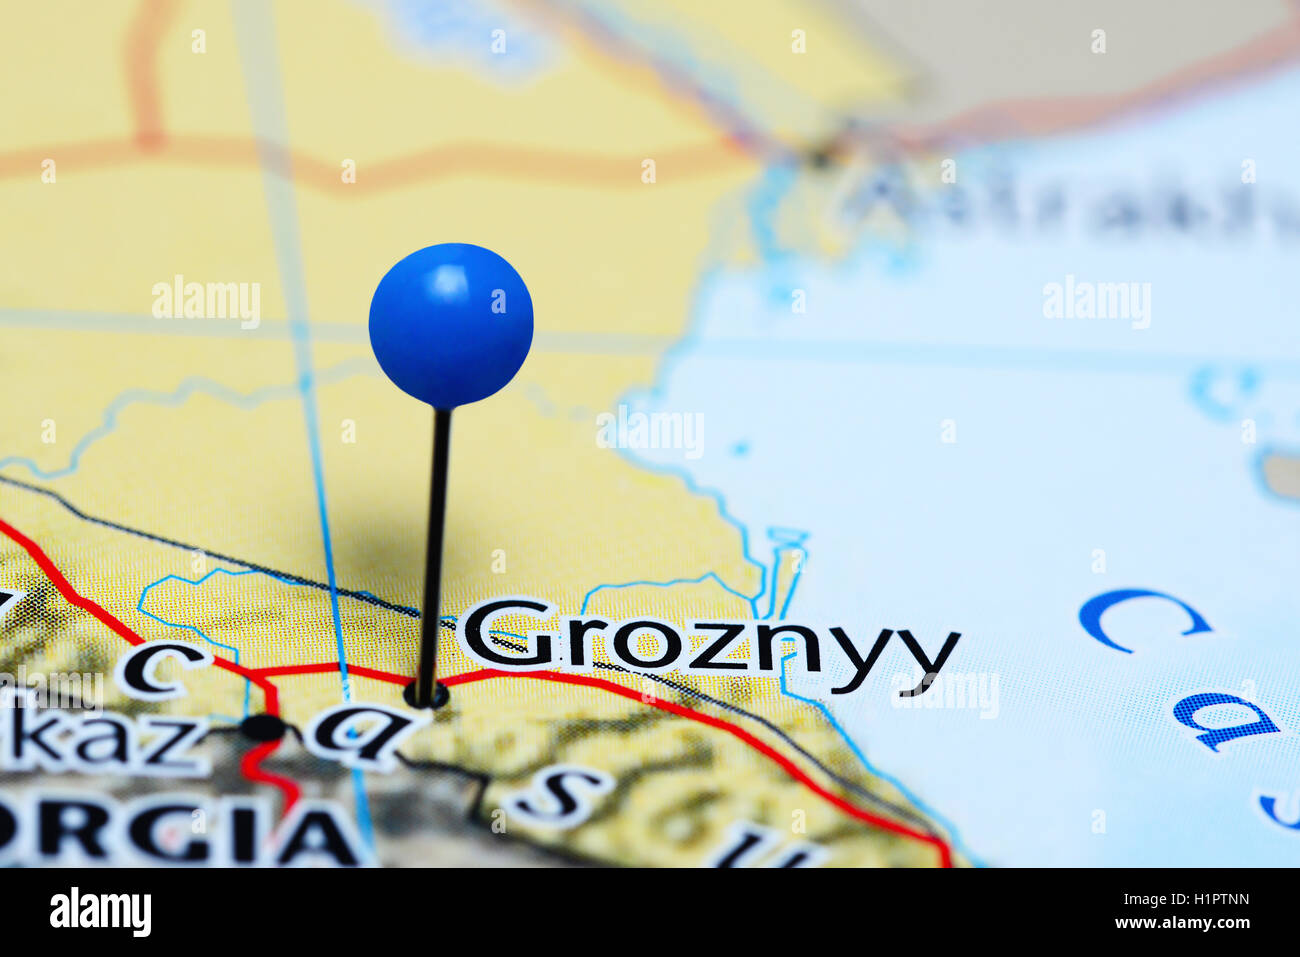 Groznyy pinned on a map of Russia Stock Photo